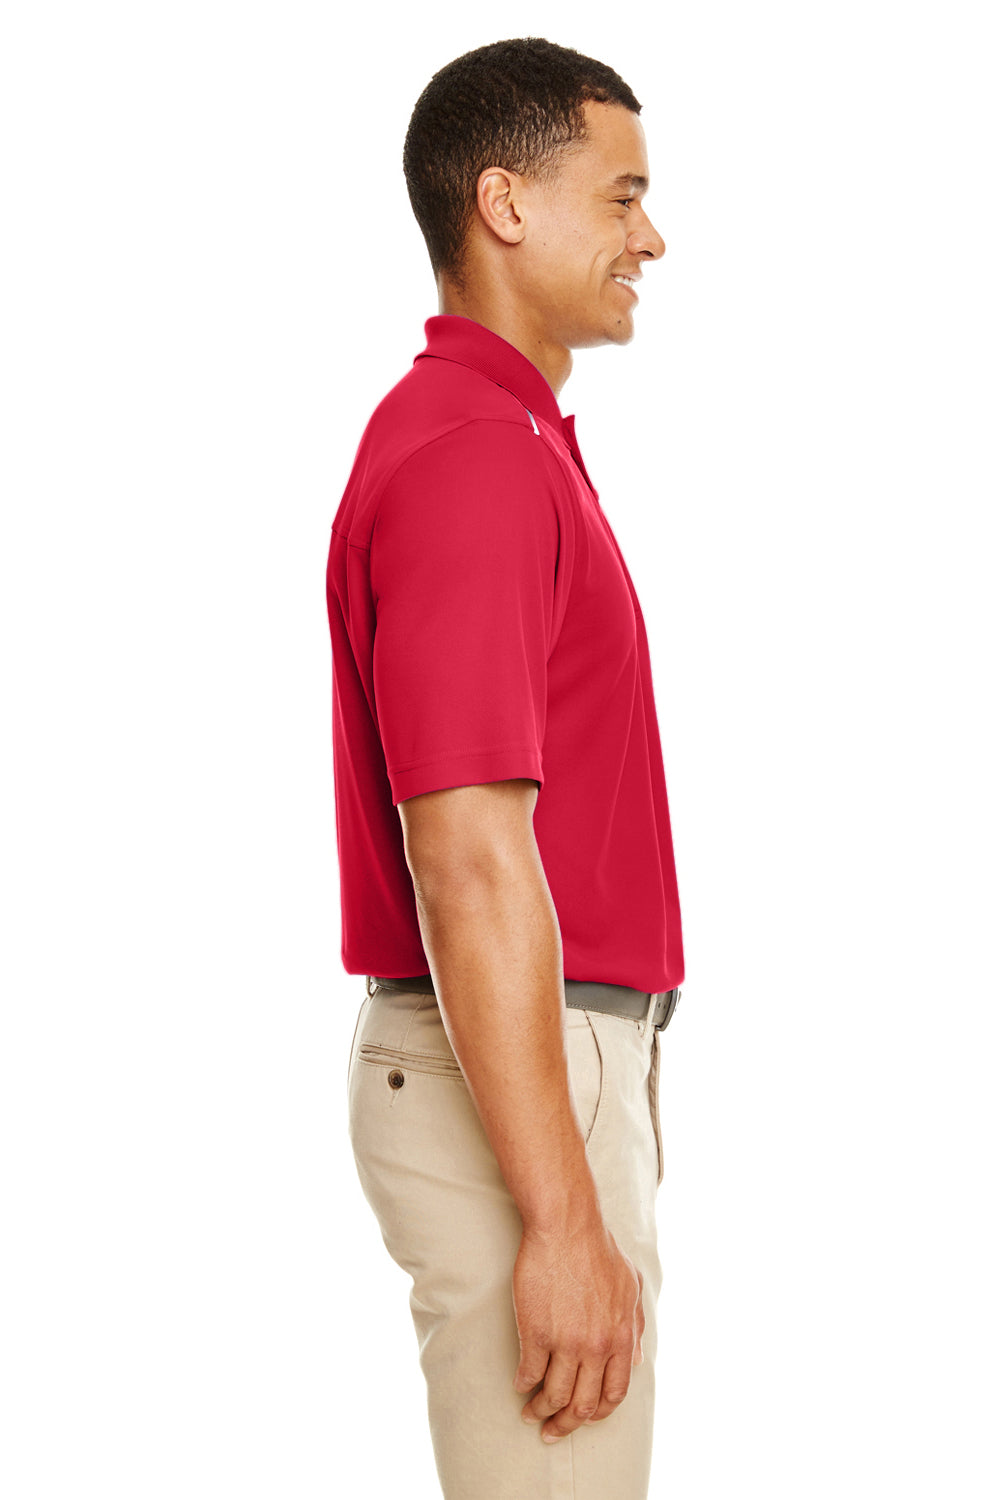 Core 365 88181R Mens Radiant Performance Moisture Wicking Short Sleeve Polo Shirt Red Side